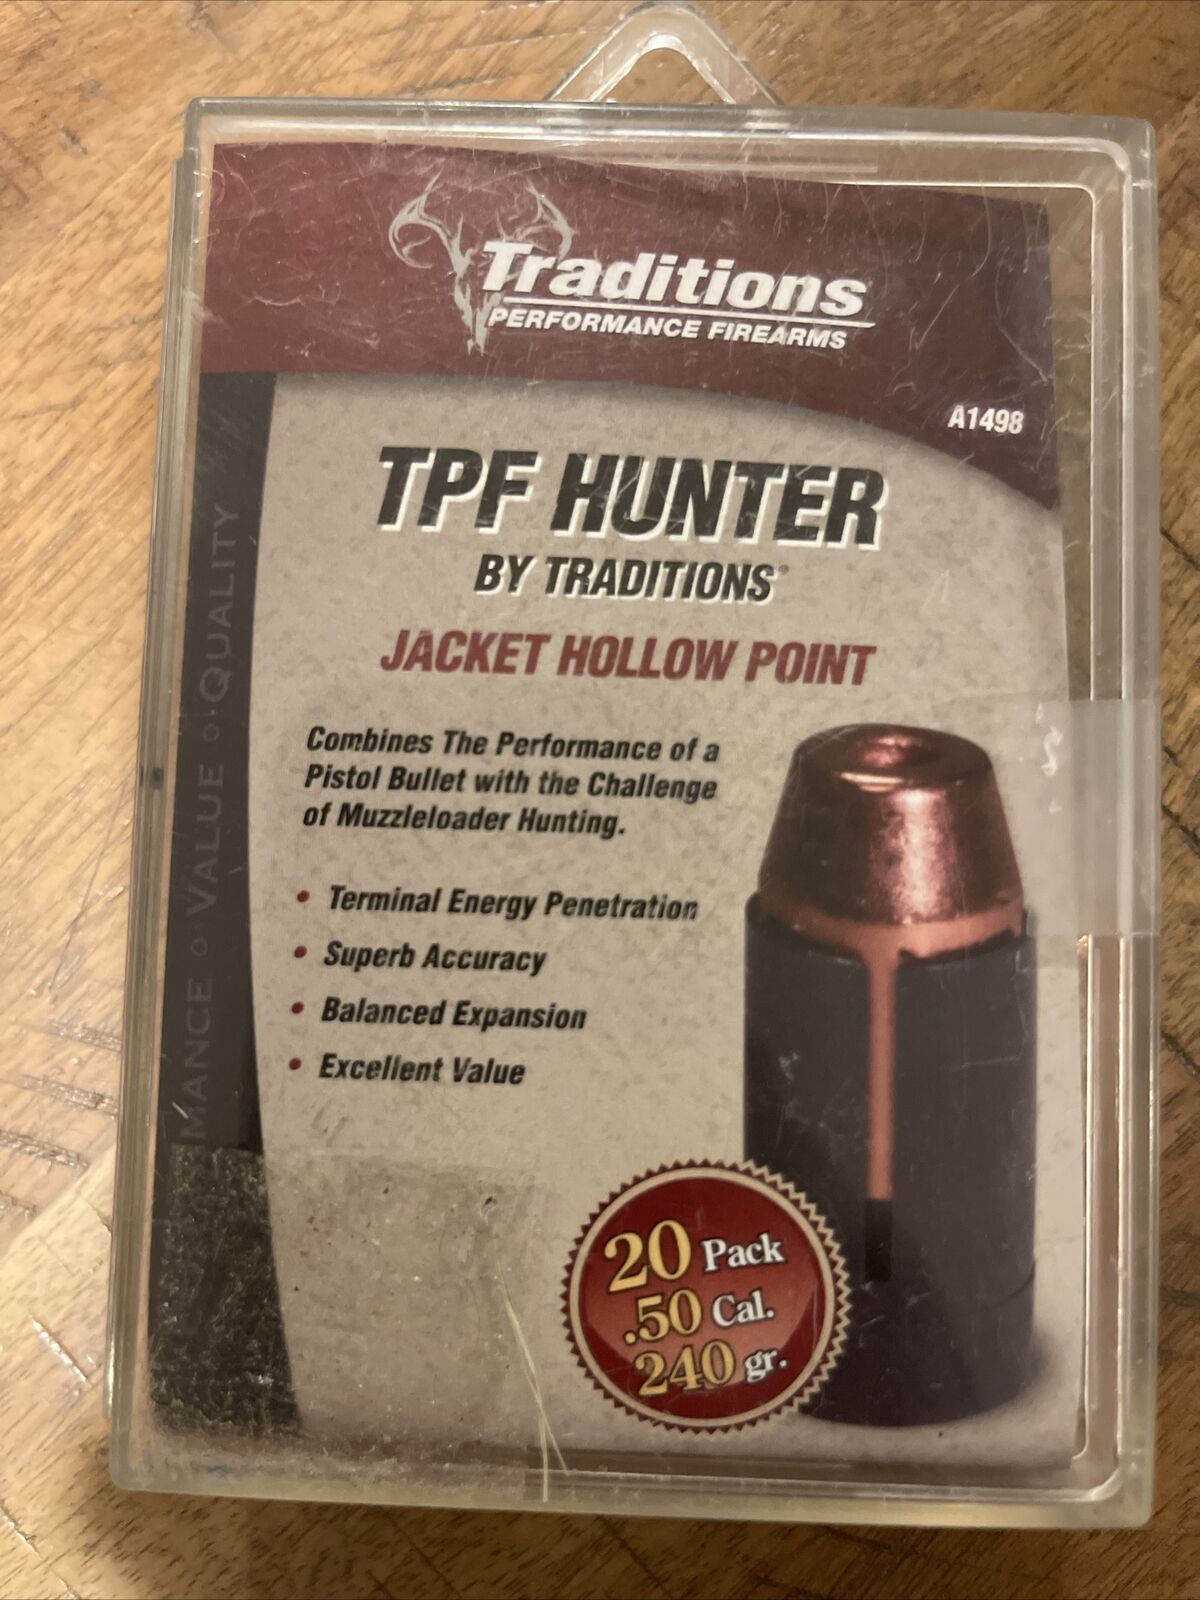 Traditions TPF Hunter .50 Cal 240 gr. Muzzle loader Round 20 Pack New